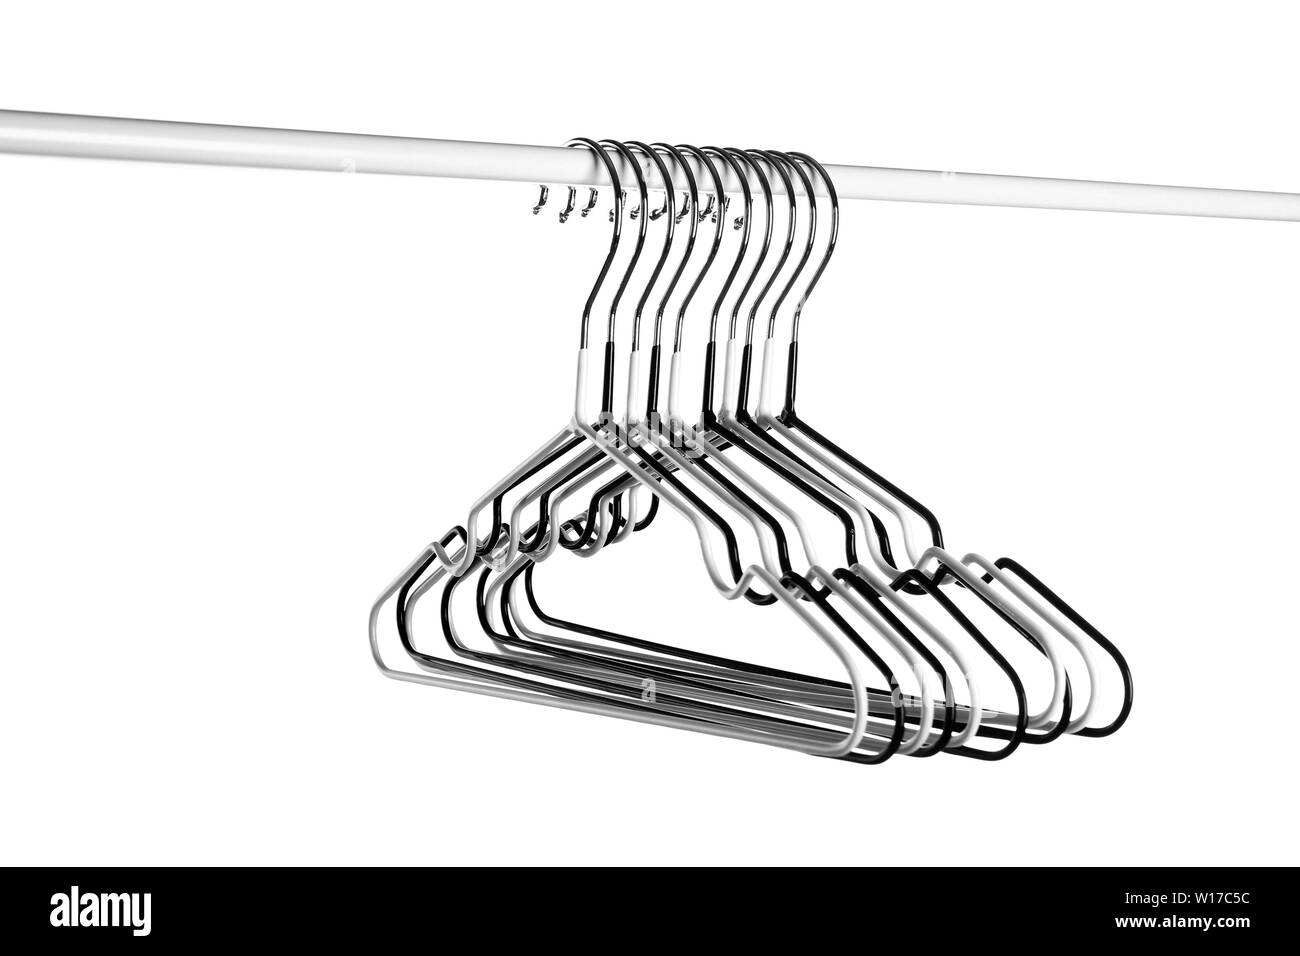 Rack with clothes hangers on white background Stock Photo